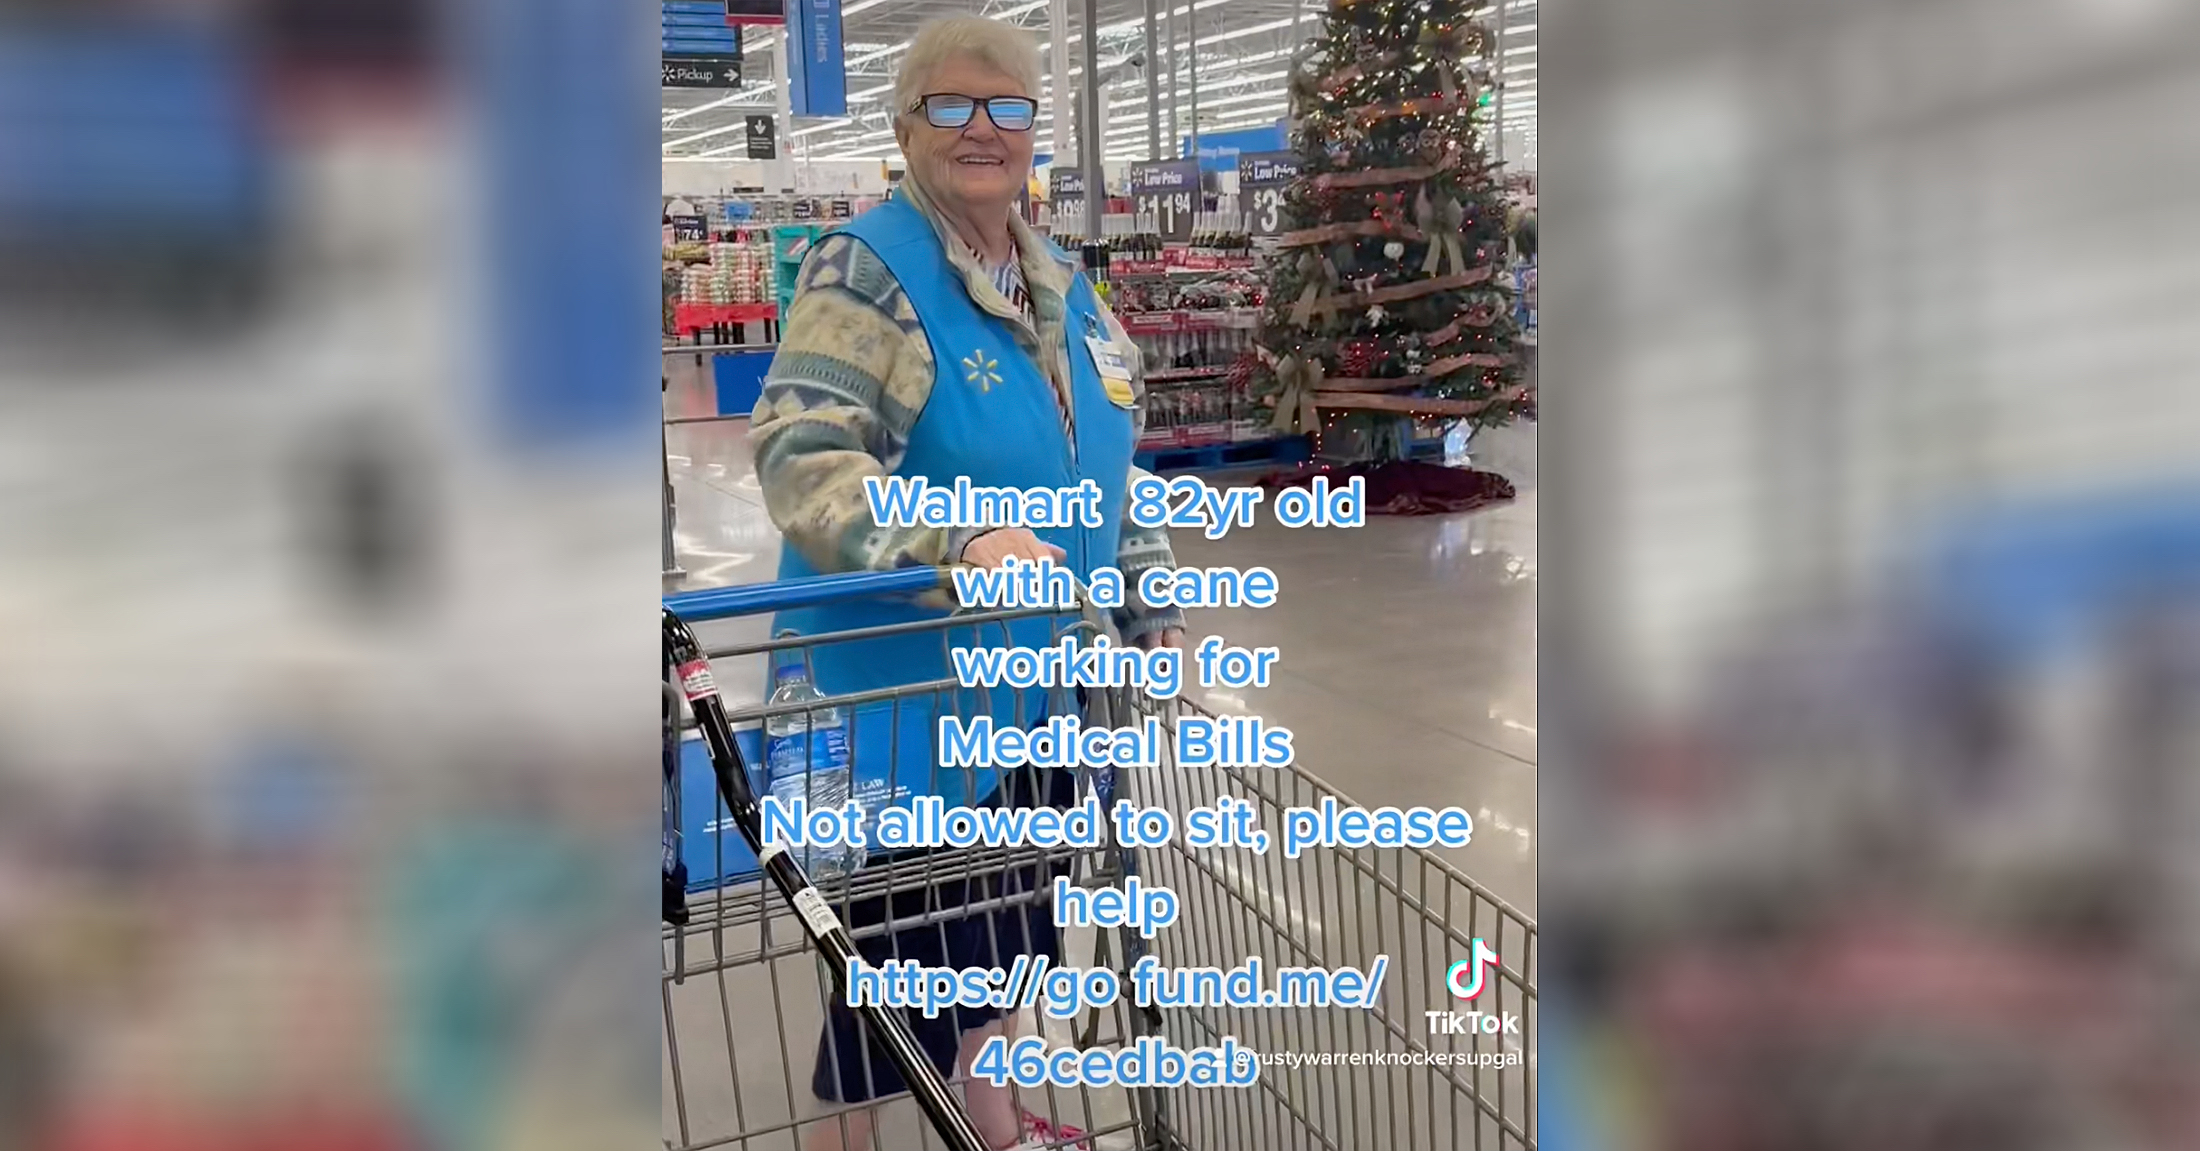 PHOTO: Liz Rizzo's Dec. 12 TikTok video showing Carman Kelly working at an Arizona Walmart has gone viral with more than 15 million views in over two weeks.